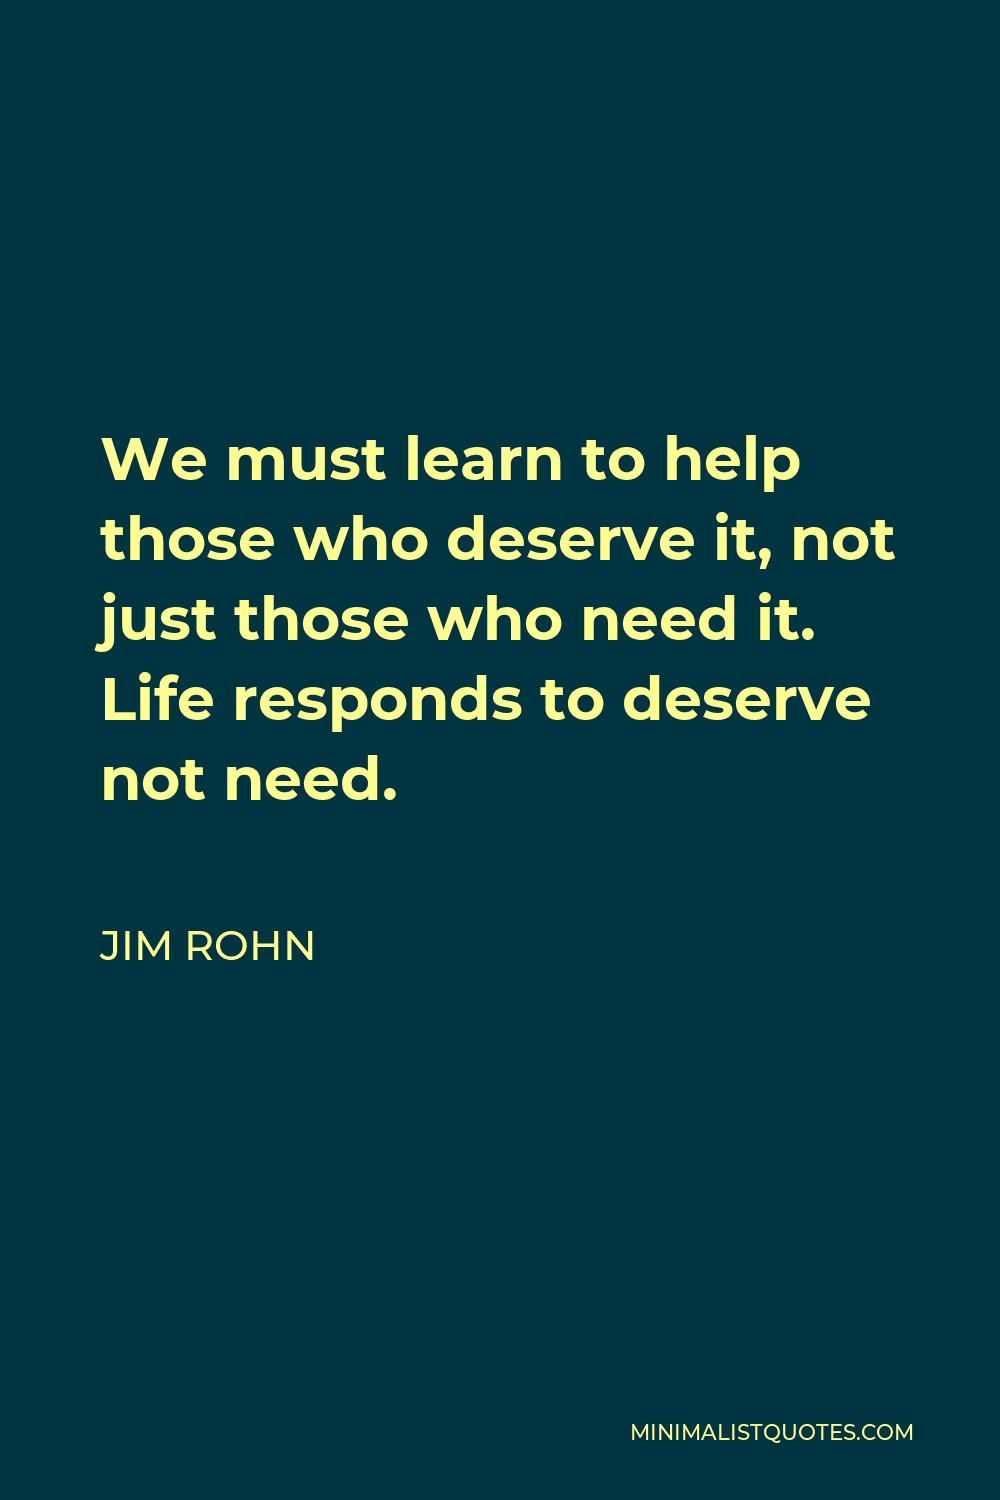 Jim Rohn Quote - We must learn to help those who deserve it, not just those who need it. Life responds to deserve not need.